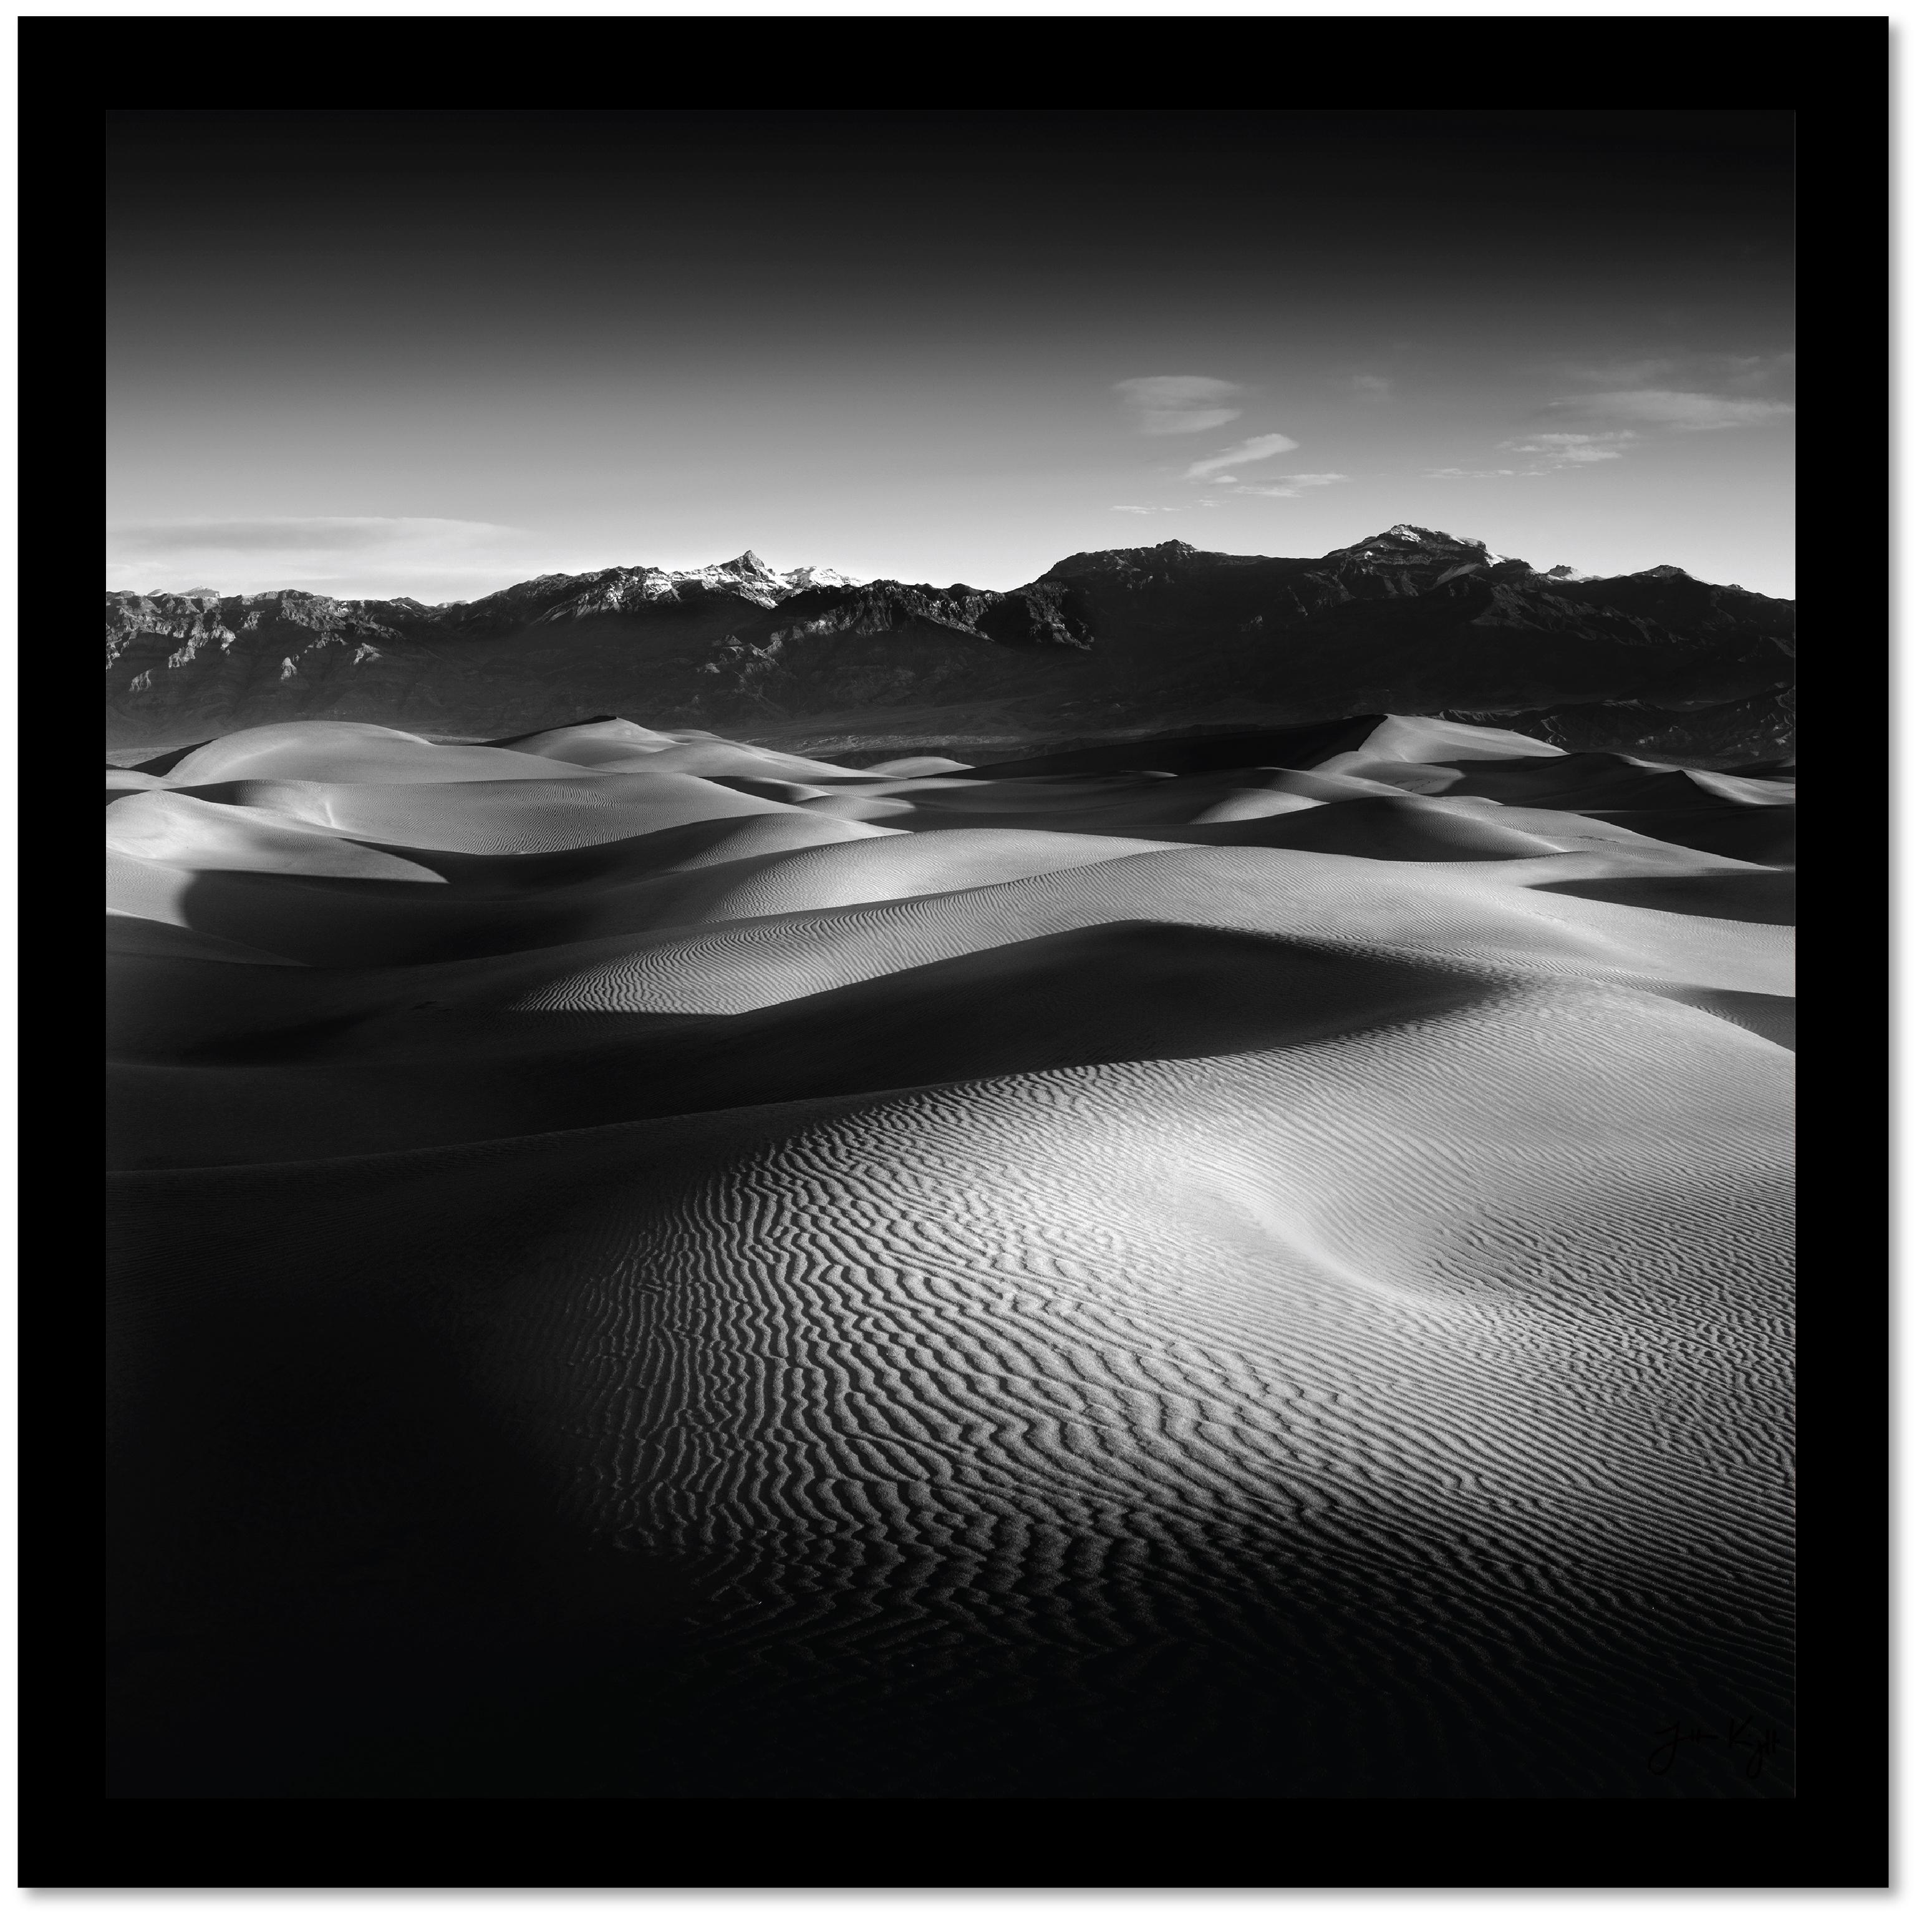 Summit & Dunes, Death Valley. Fine art black & white landscape photography print - Photograph by Jonathan Knight